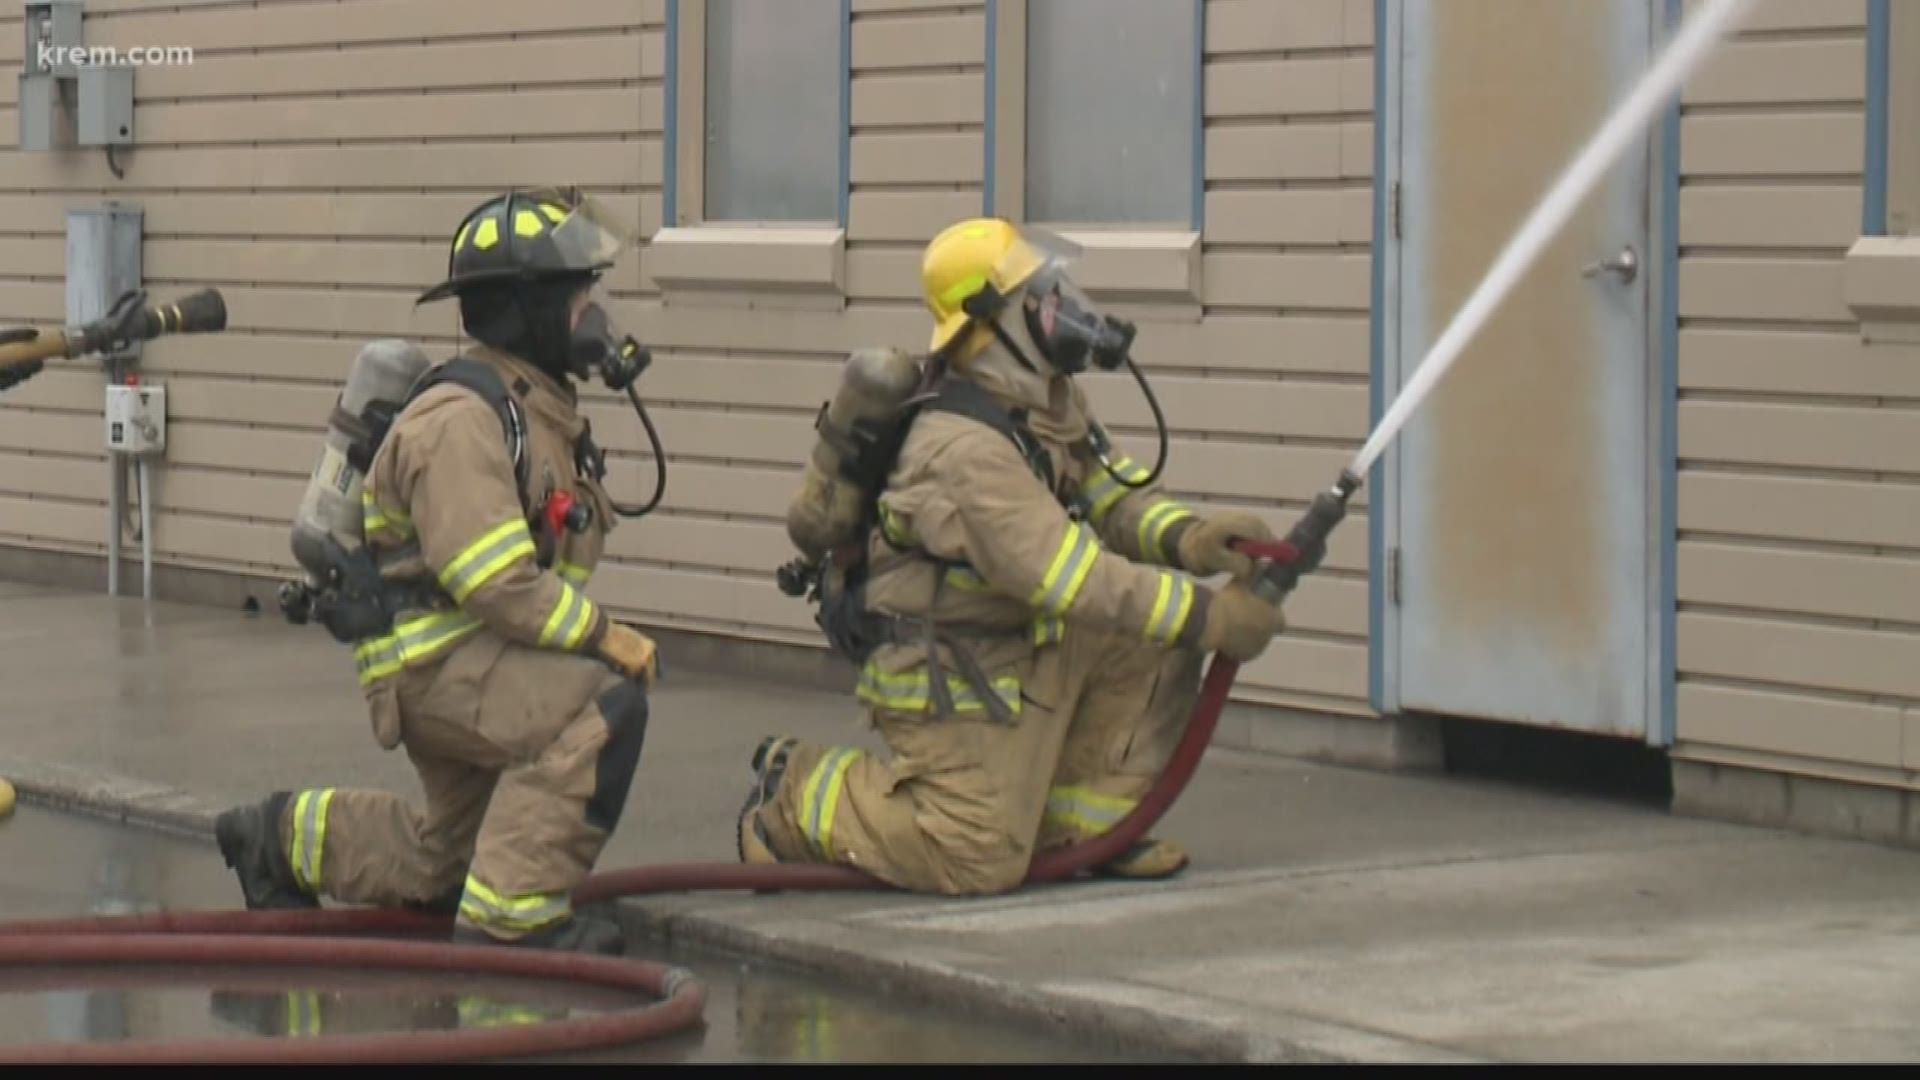 Our Taylor Viydo teamed up with the Coeur d'Alene Fire Department to get insight on their work.